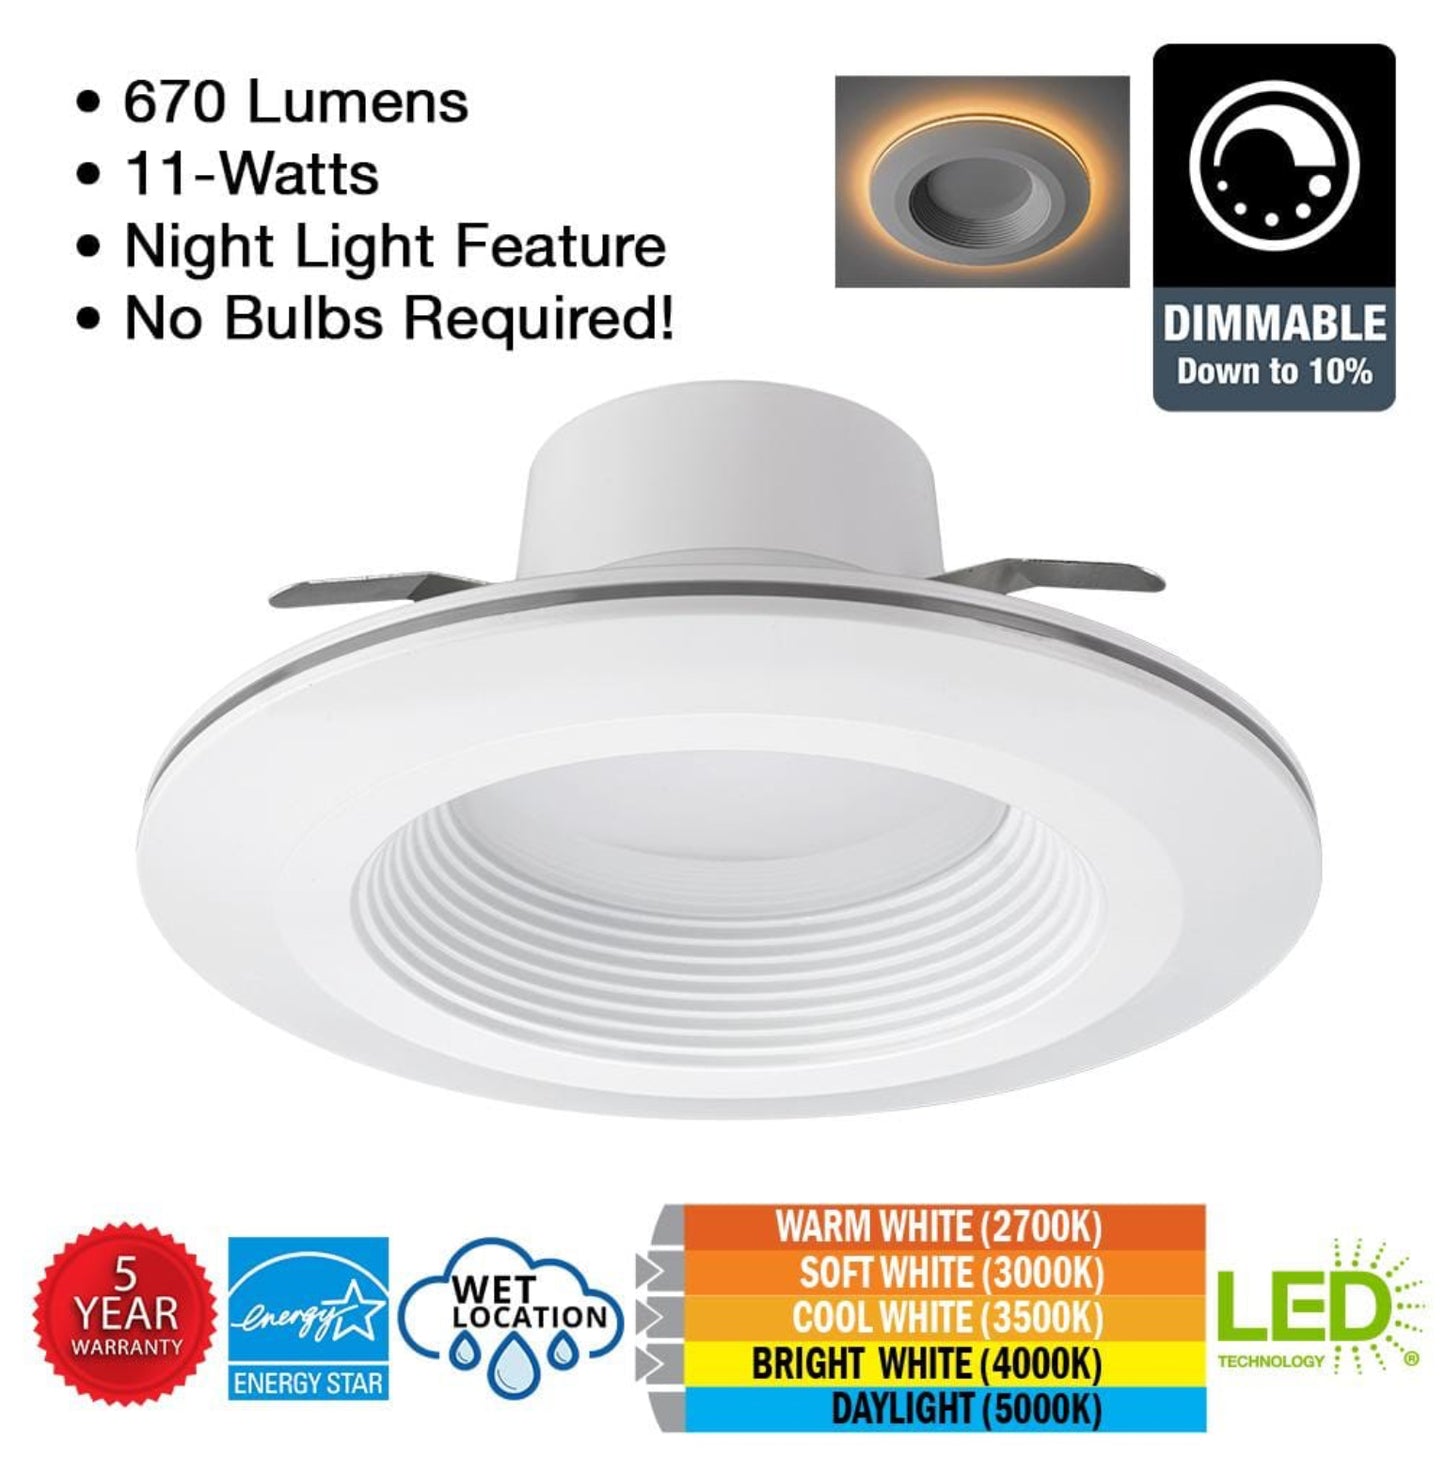 Commercial Electric 6 in. Selectable CCT Integrated LED Recessed Light Trim with Night Light Feature 670 Lumens 11-Watt Dimmable Damaged Box